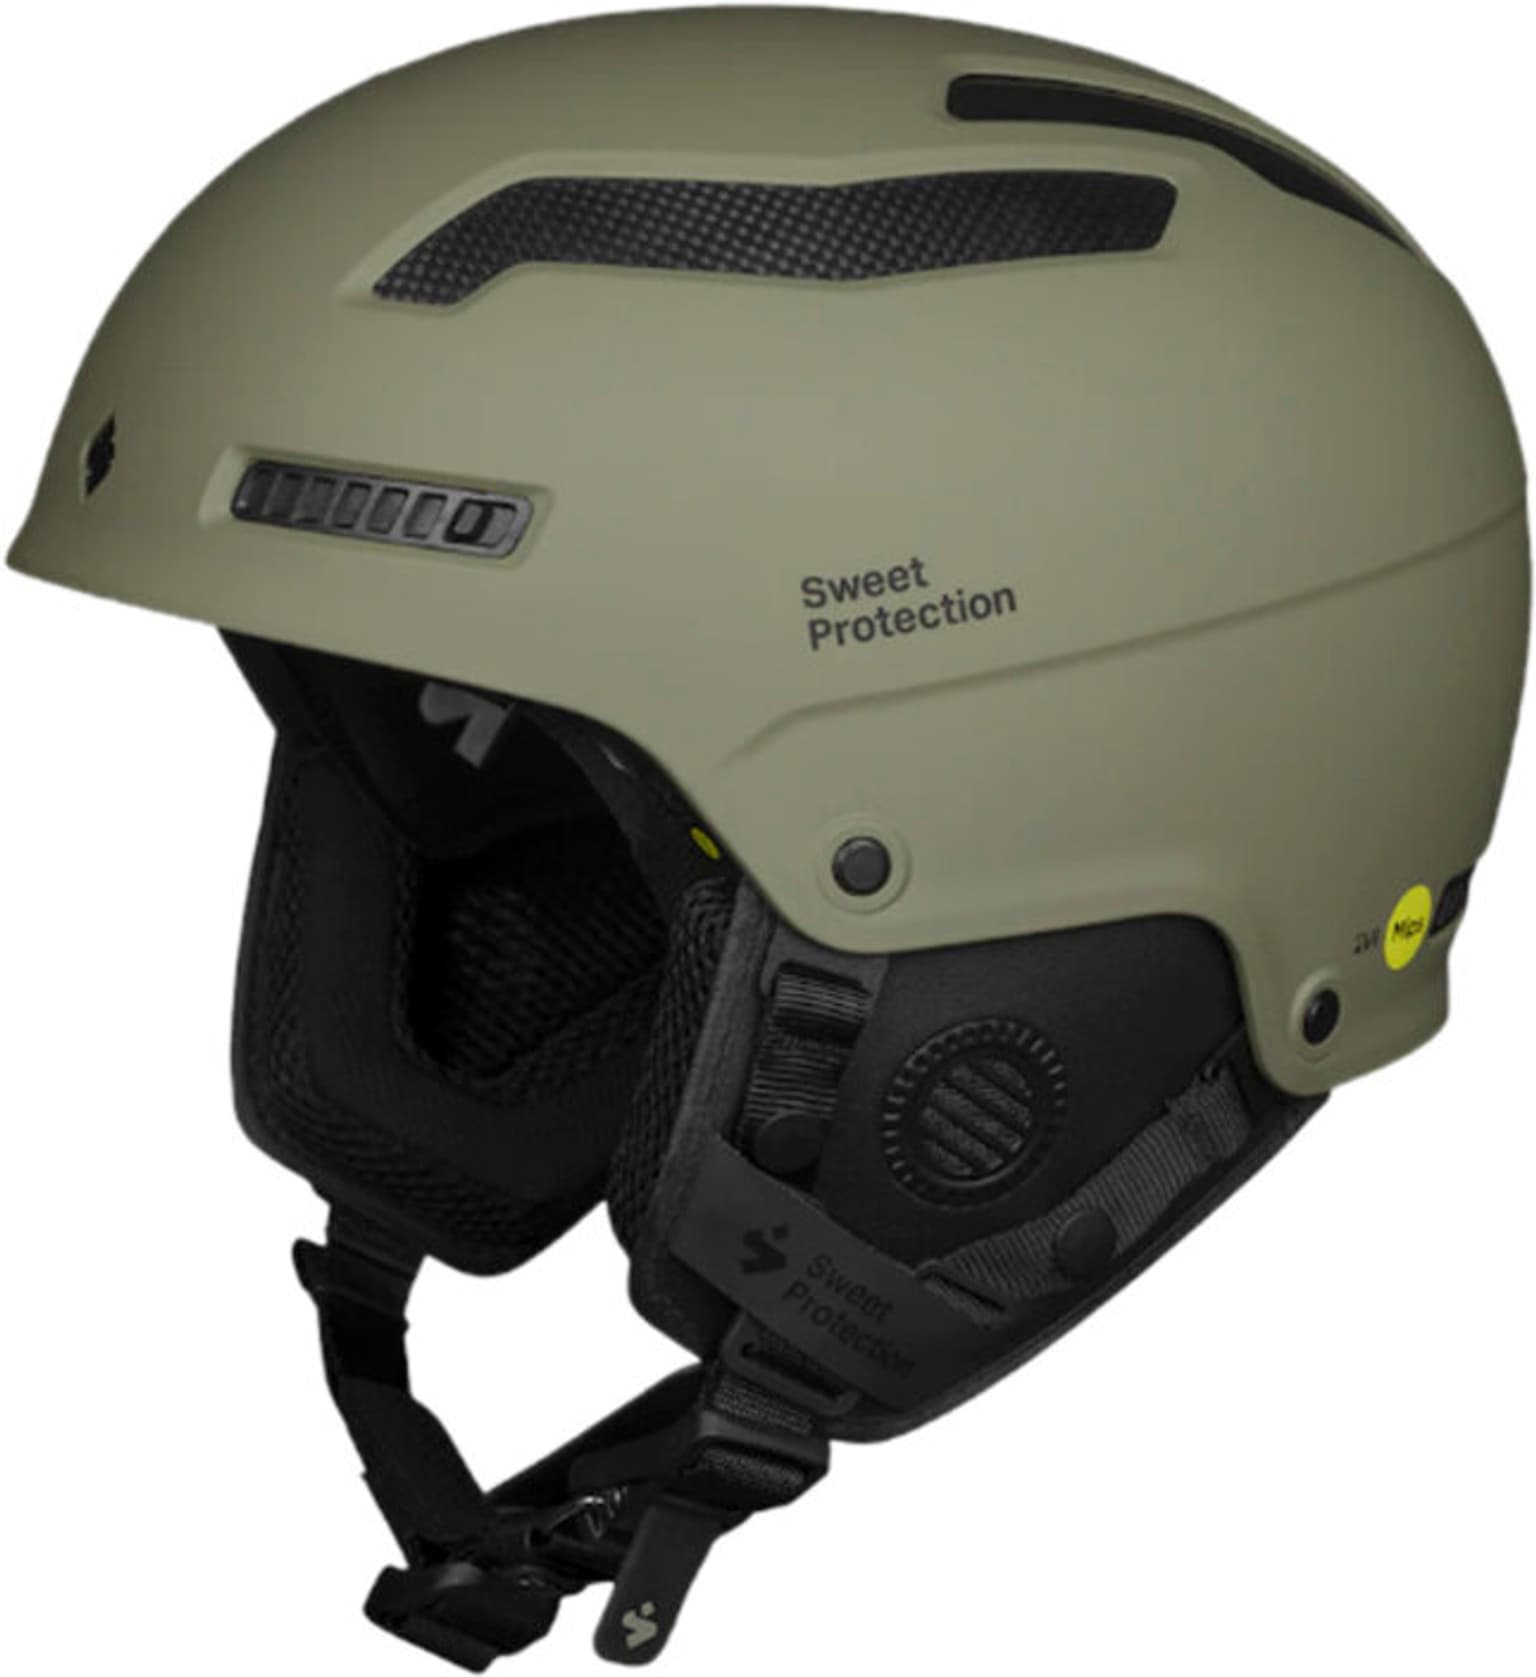 Sweet Protection Sweet Protection Trooper 2Vi Mips Casque de ski olive 1